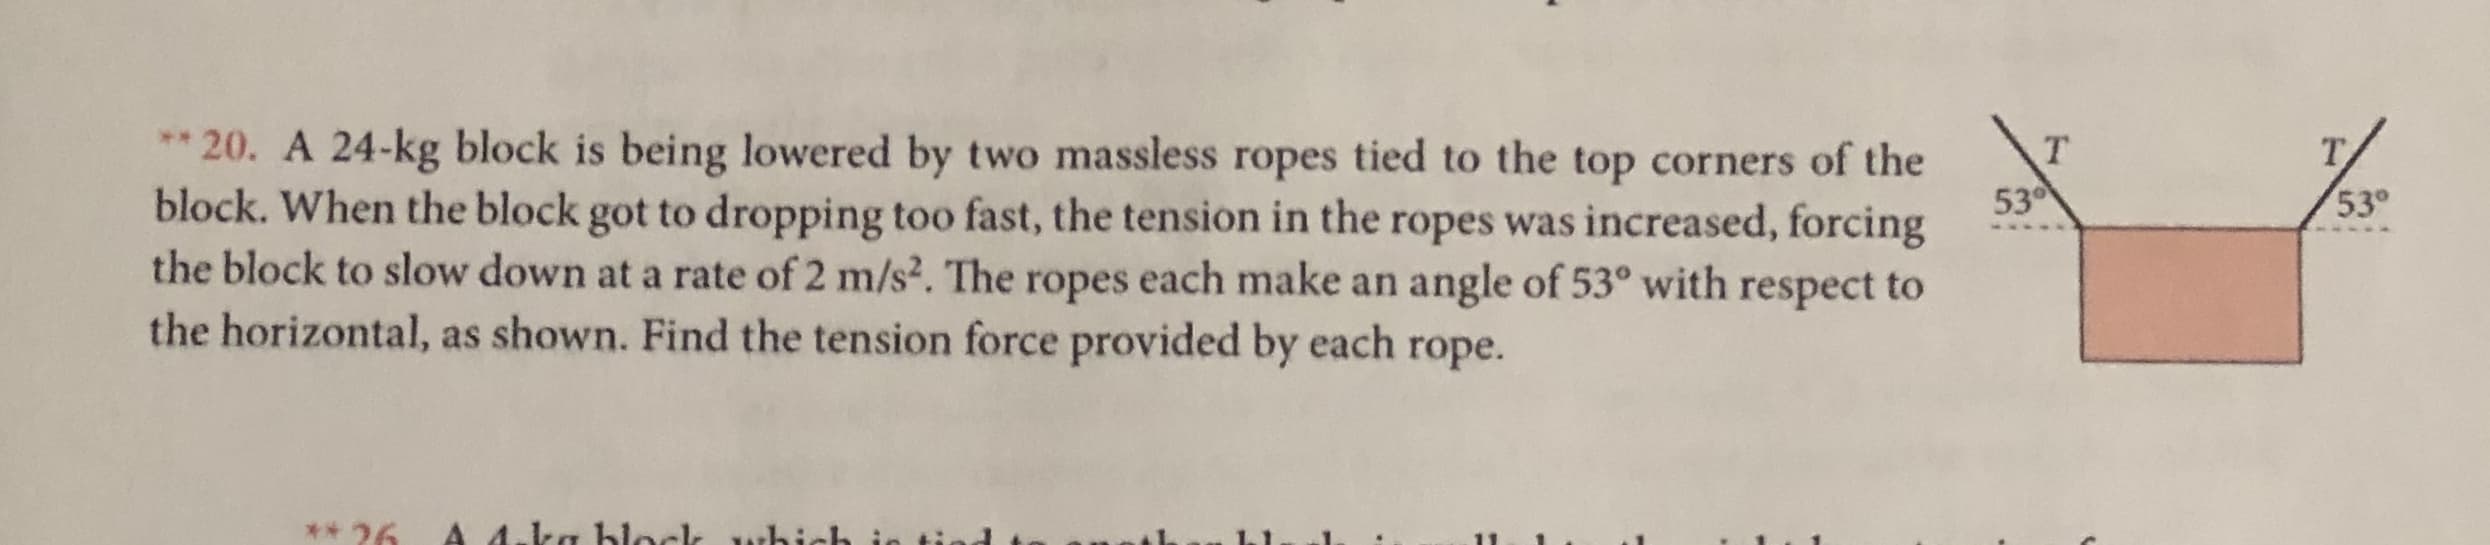 20. A 24-kg block is being lowered by two massless ropes tied to the top corners of the
block. When the block got to dropping too fast, the tension in the ropes was increased, forcing
the block to slow down at a rate of 2 m/s2. The ropes each make an
the horizontal, as shown. Find the tension force provided by each rope.
**
т
Т.
530
53°
angle of 53° with respect to
A 4.ka hlockk whi
26
